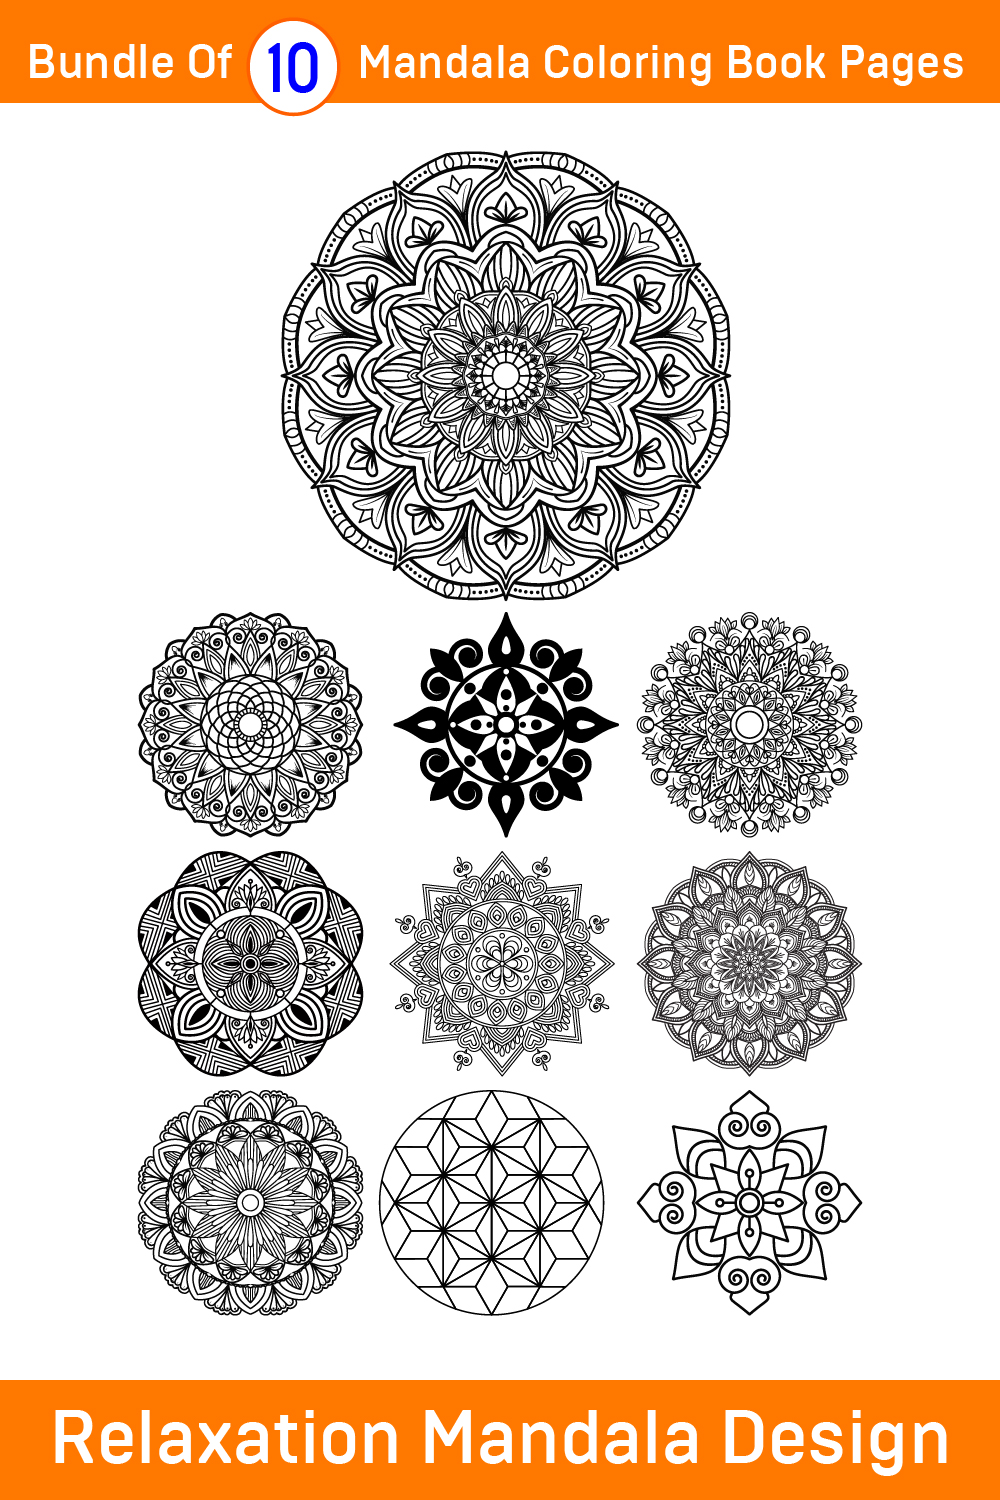 Bundle of 10 Relaxation Mandalas Coloring Book Pages pinterest preview image.